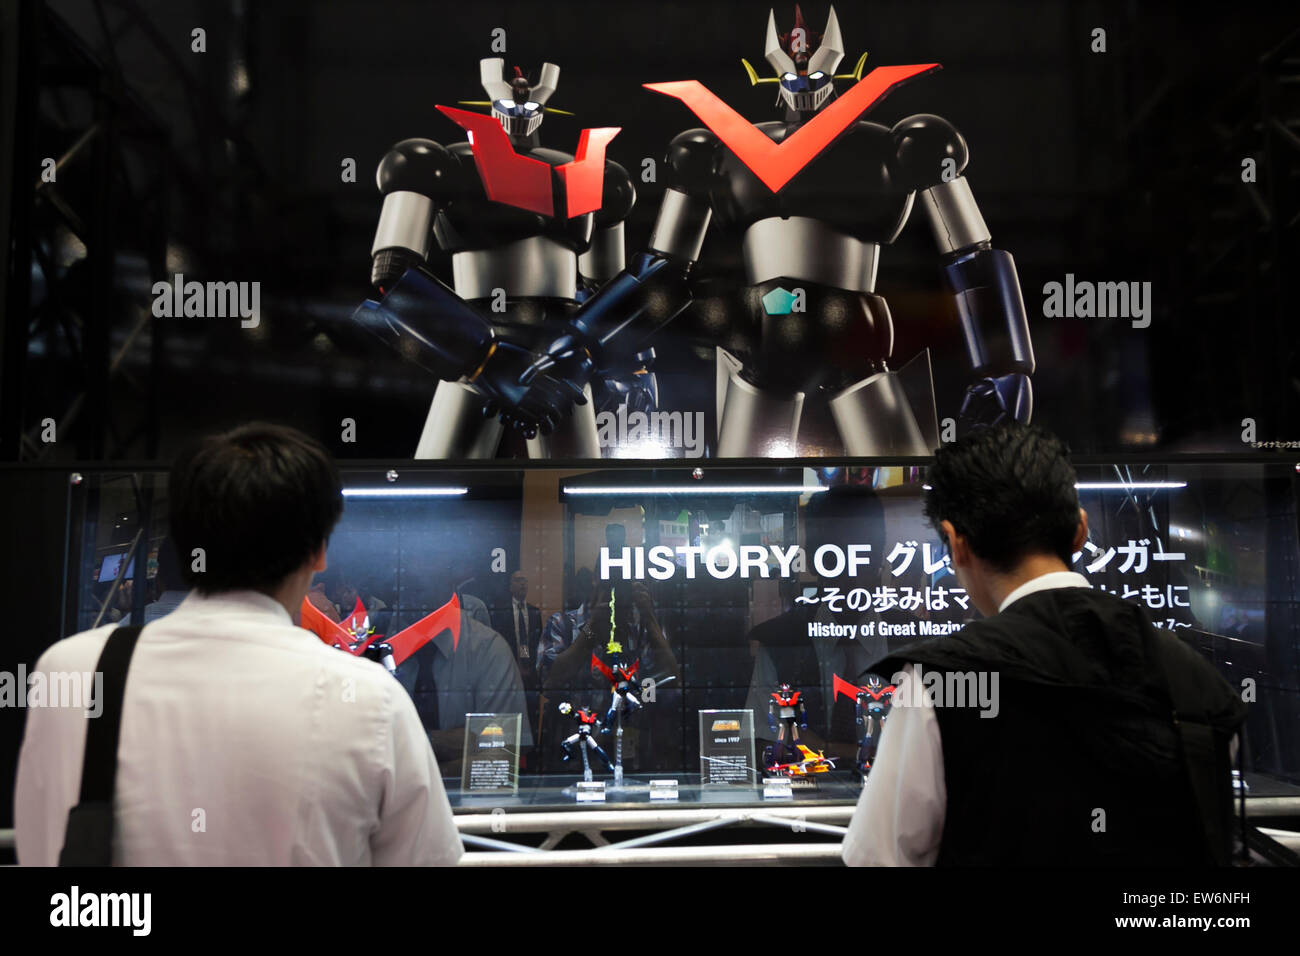 Visitors look at the action figures of Mazinger at the International Tokyo Toy Show 2015 in Tokyo Big Sight on June 18, 2015, Tokyo, Japan. Japan's largest trade show for toy makers attracts buyers and collectors by introducing the latest products from different toymakers from Japan and overseas. The toy fair showcases about 35,000 toys from 149 domestic and foreign companies and is held over four days. © Rodrigo Reyes Marin/AFLO/Alamy Live News Stock Photo